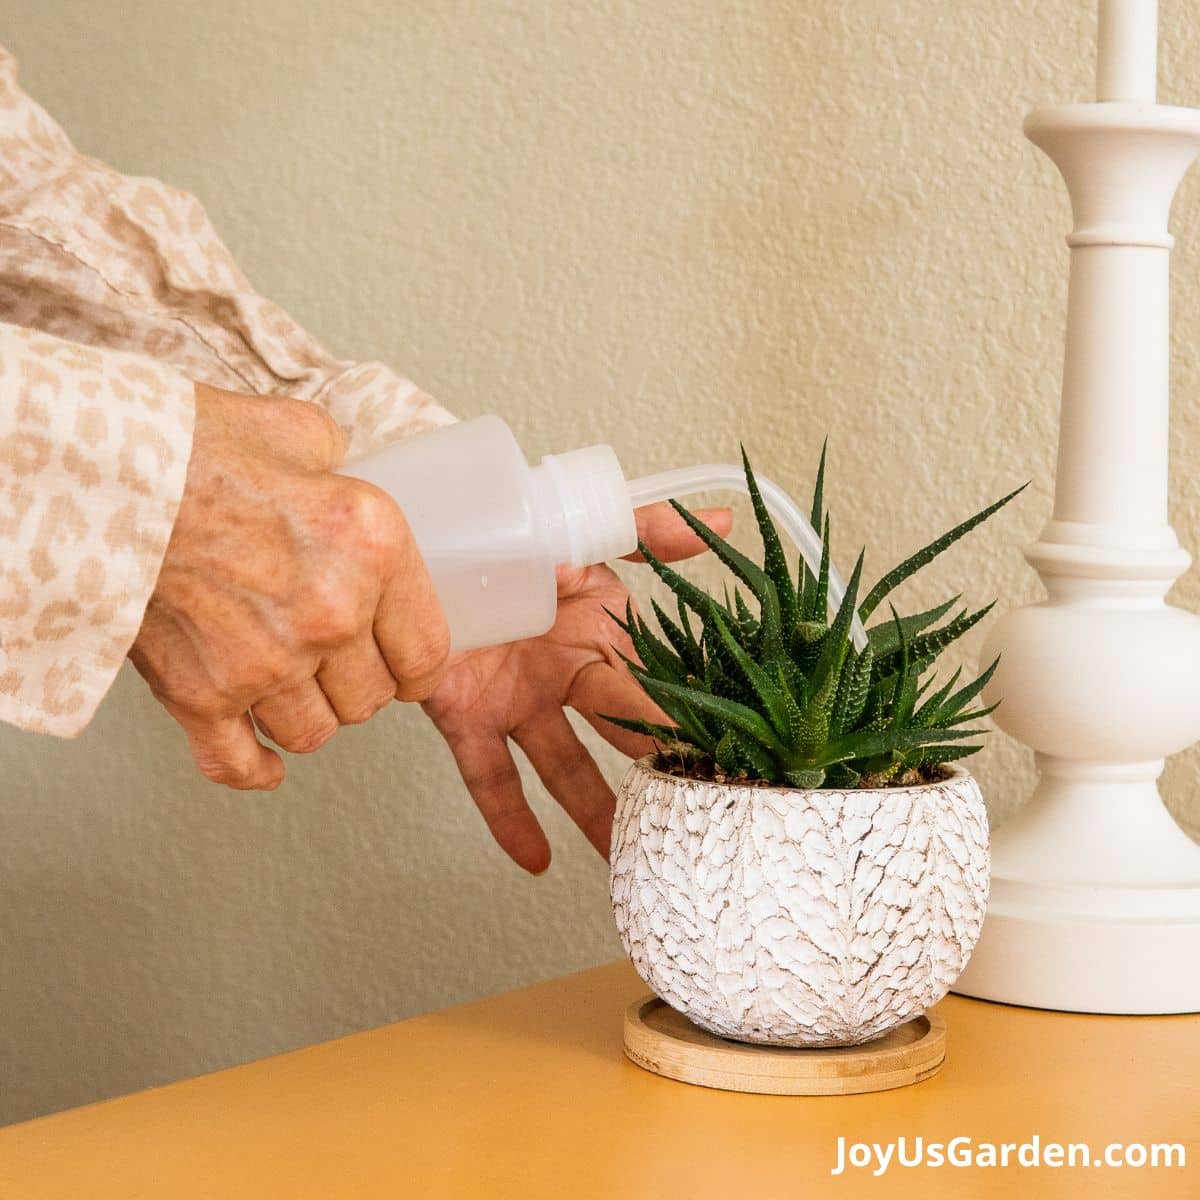 nell foster using a small watering bottle to water haworthia in white plant pot